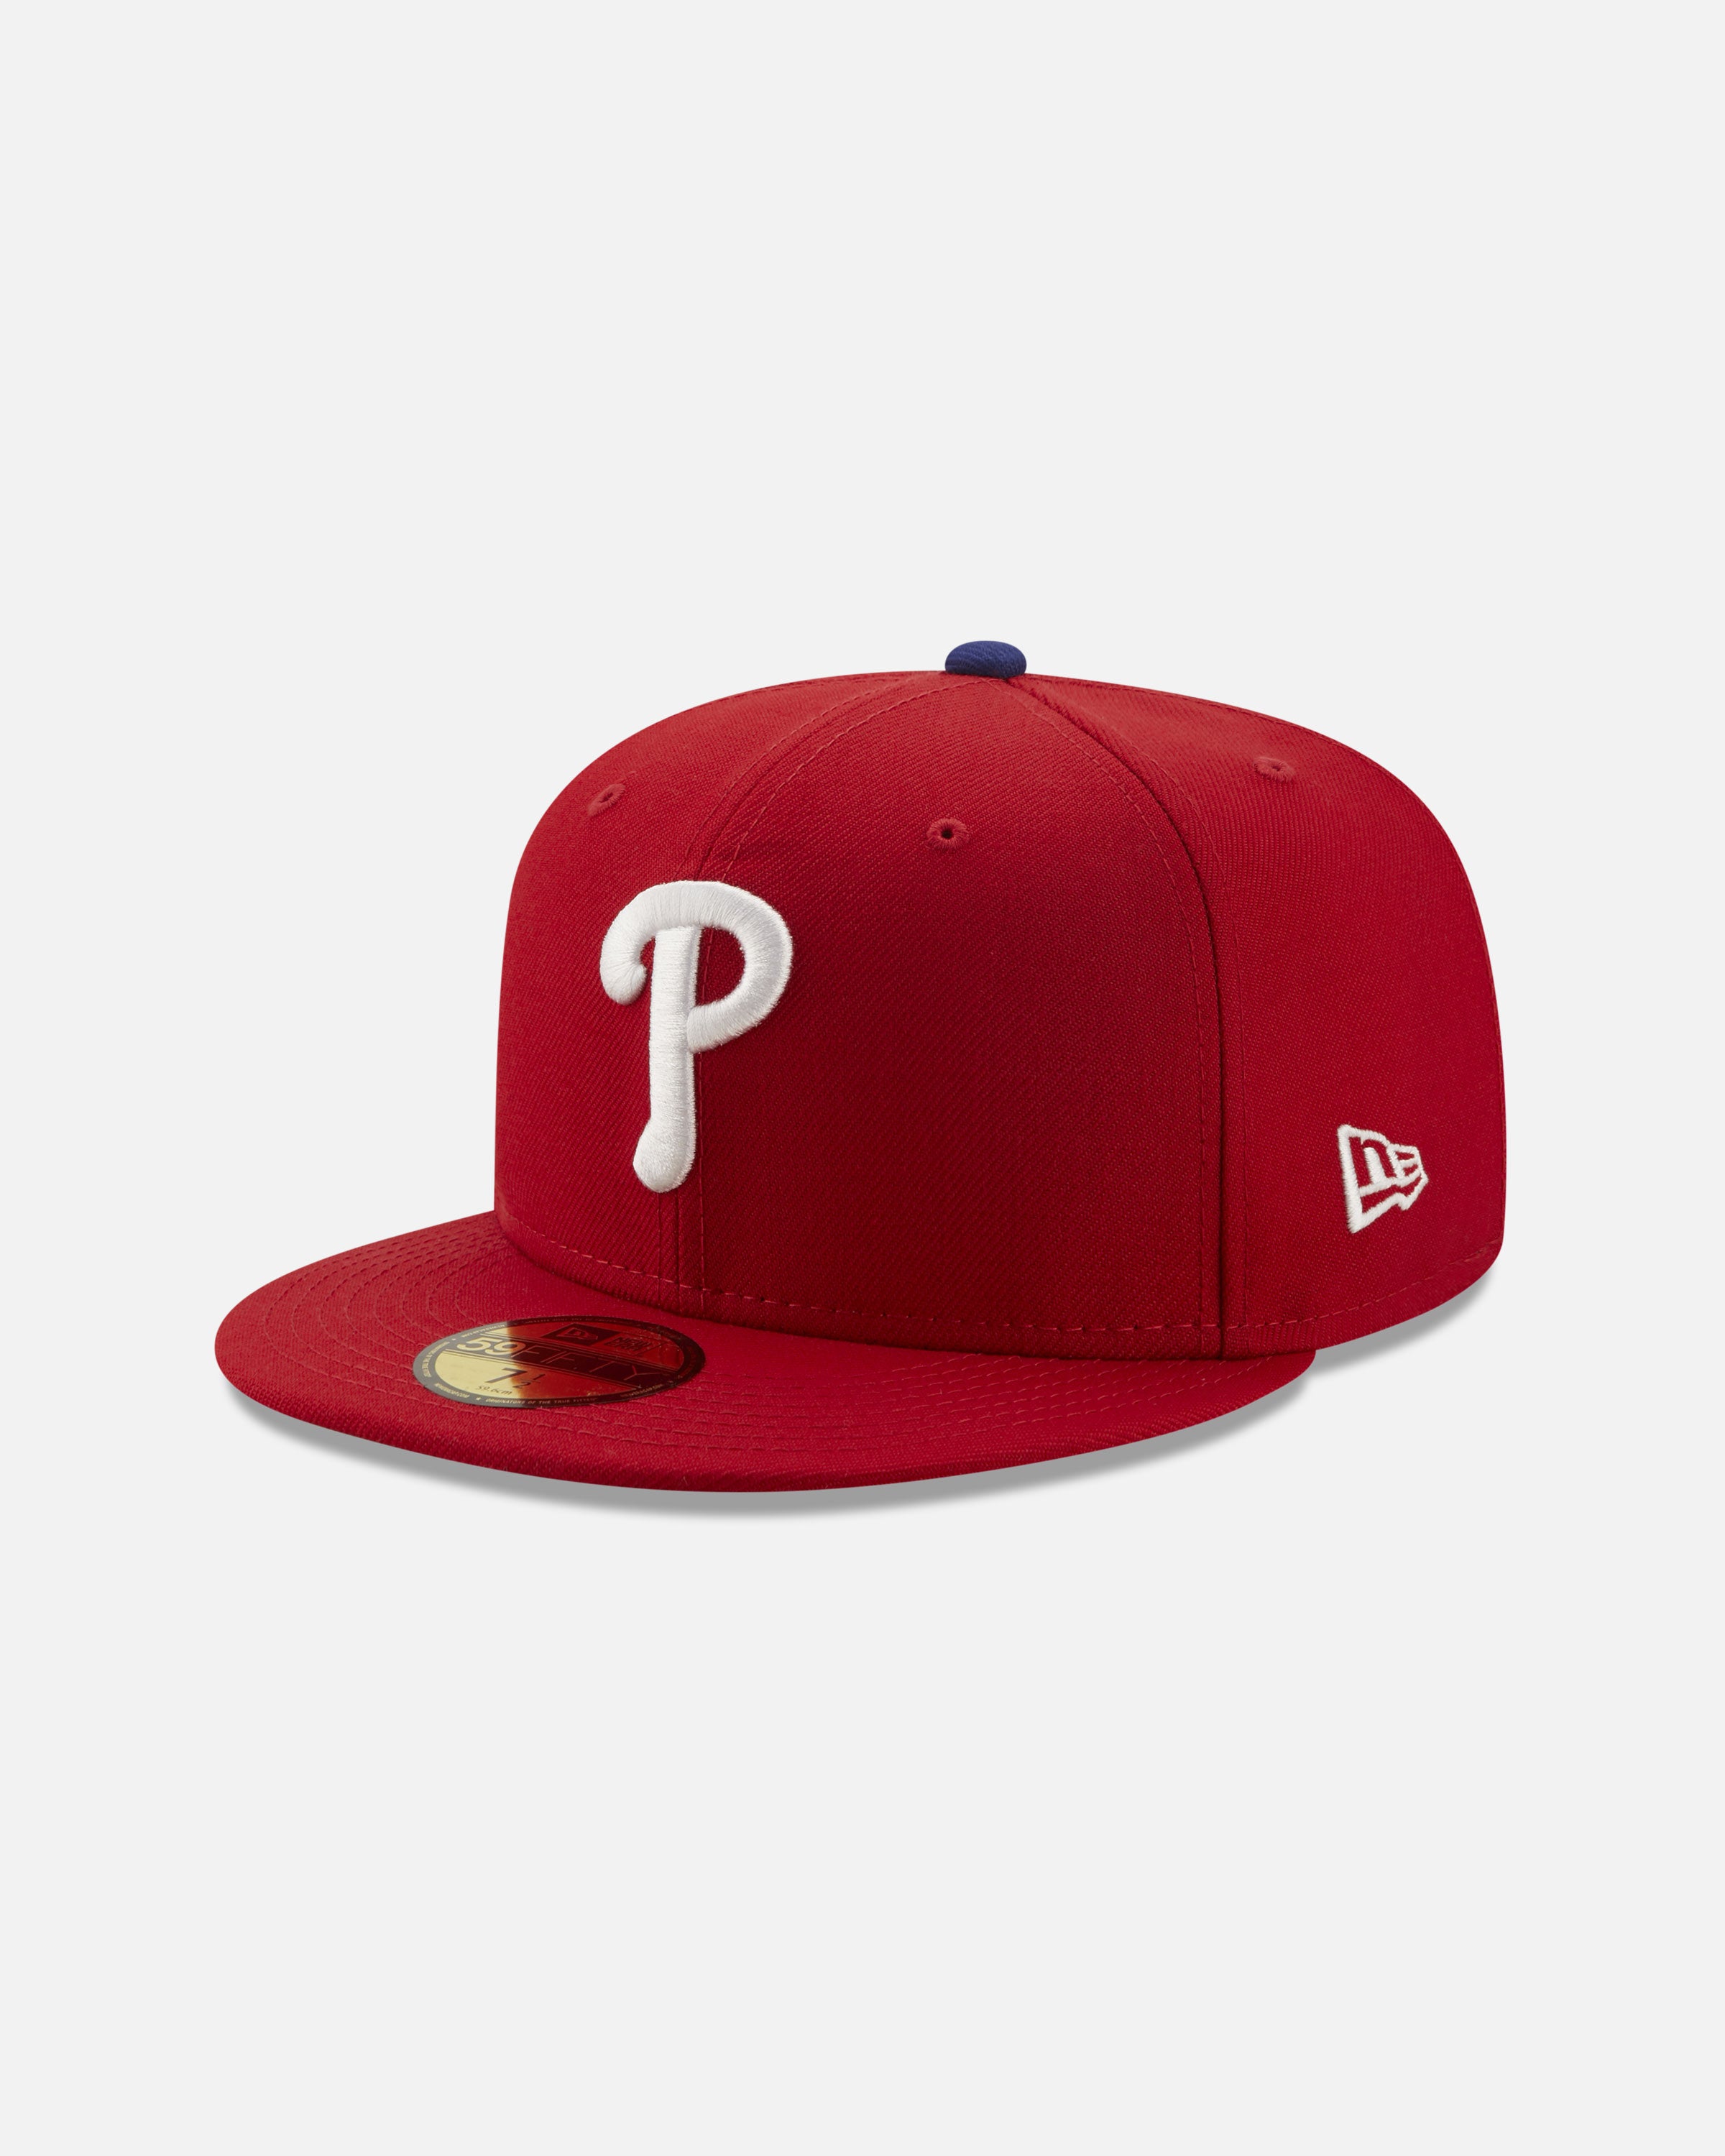 Phillies Road Jersey Concept by oldblueeyes182 on DeviantArt